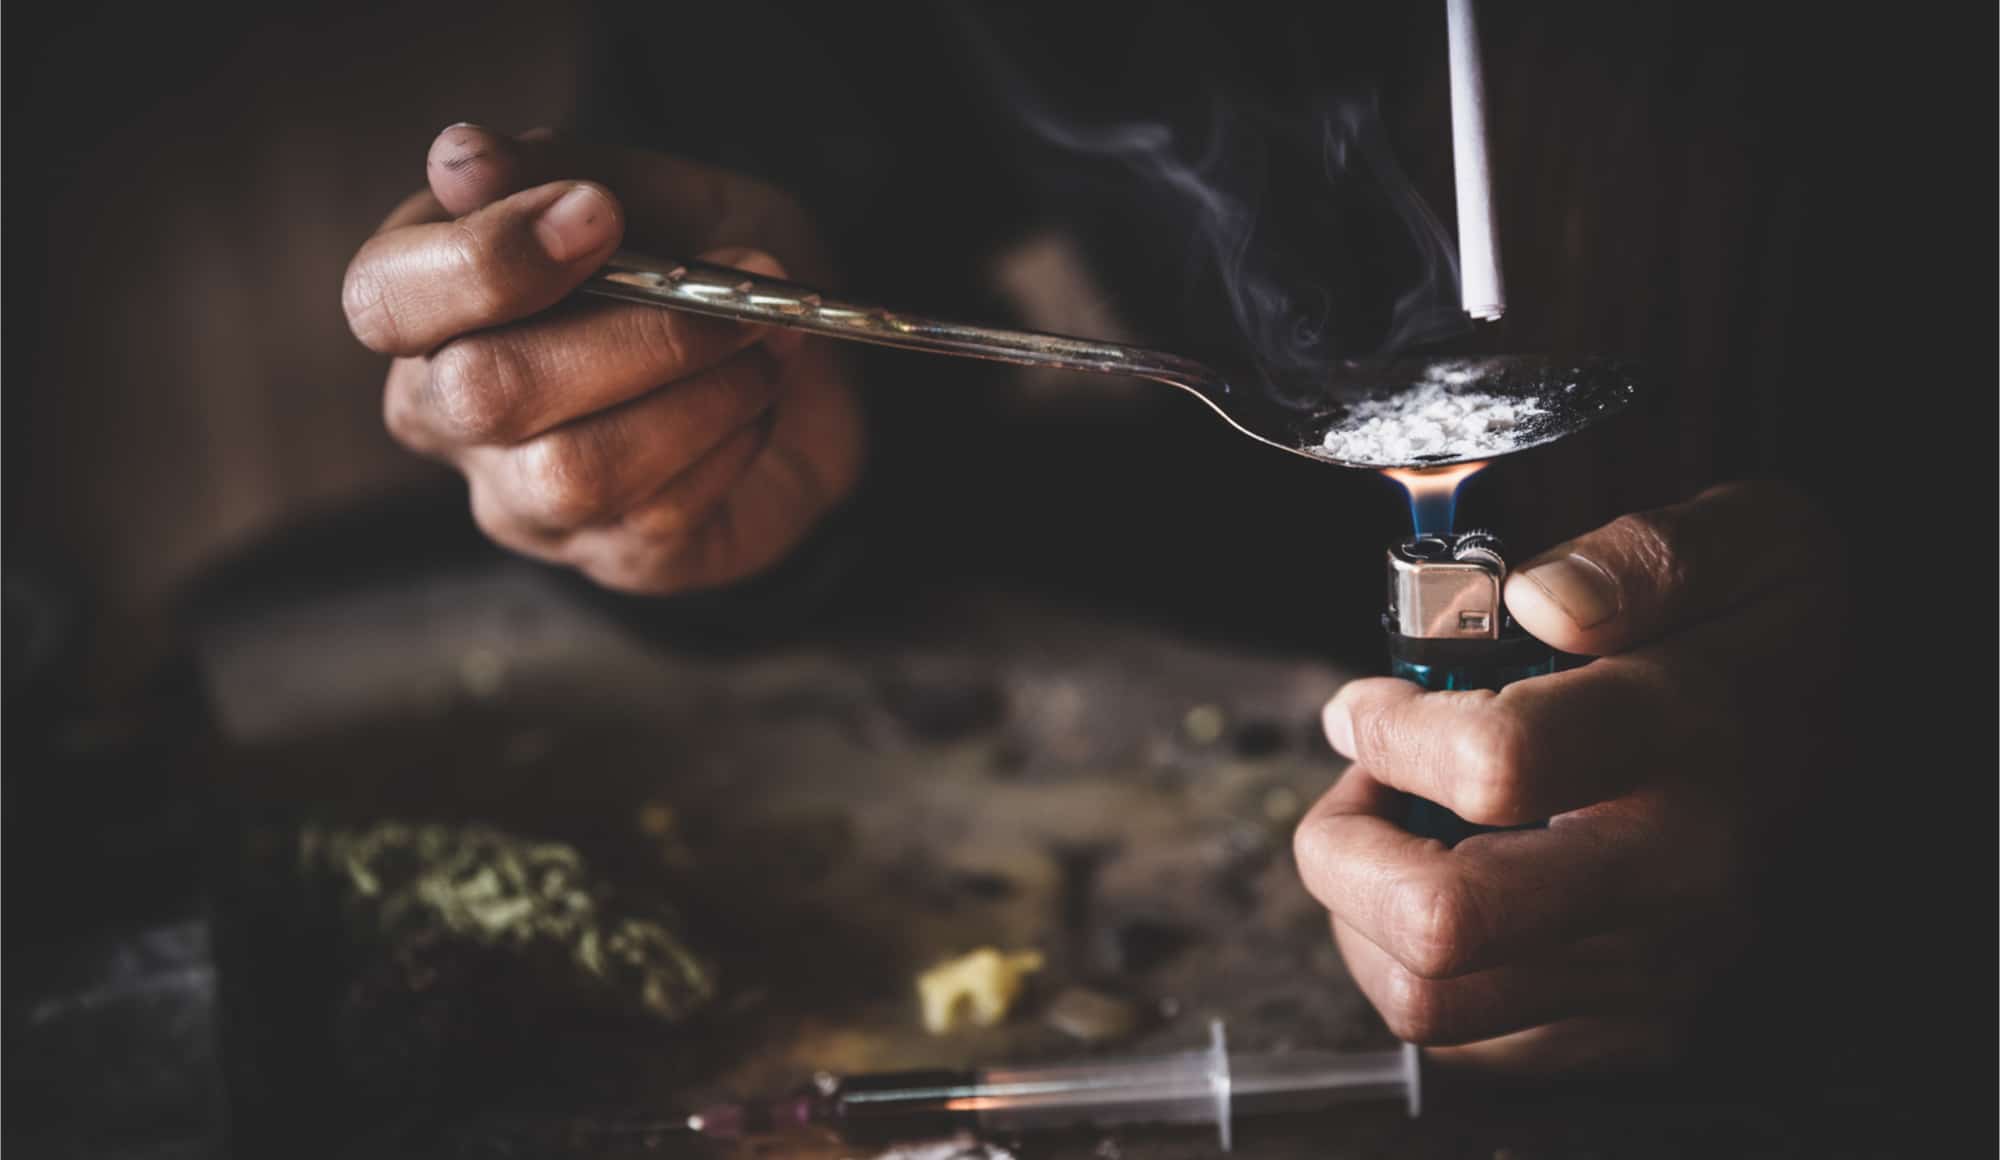 How to ask for help with drugs Pathfinders - Photo of a mans hands as he holds a lighter under a spoon with white powder in it as he sucks the smoke through a straw.